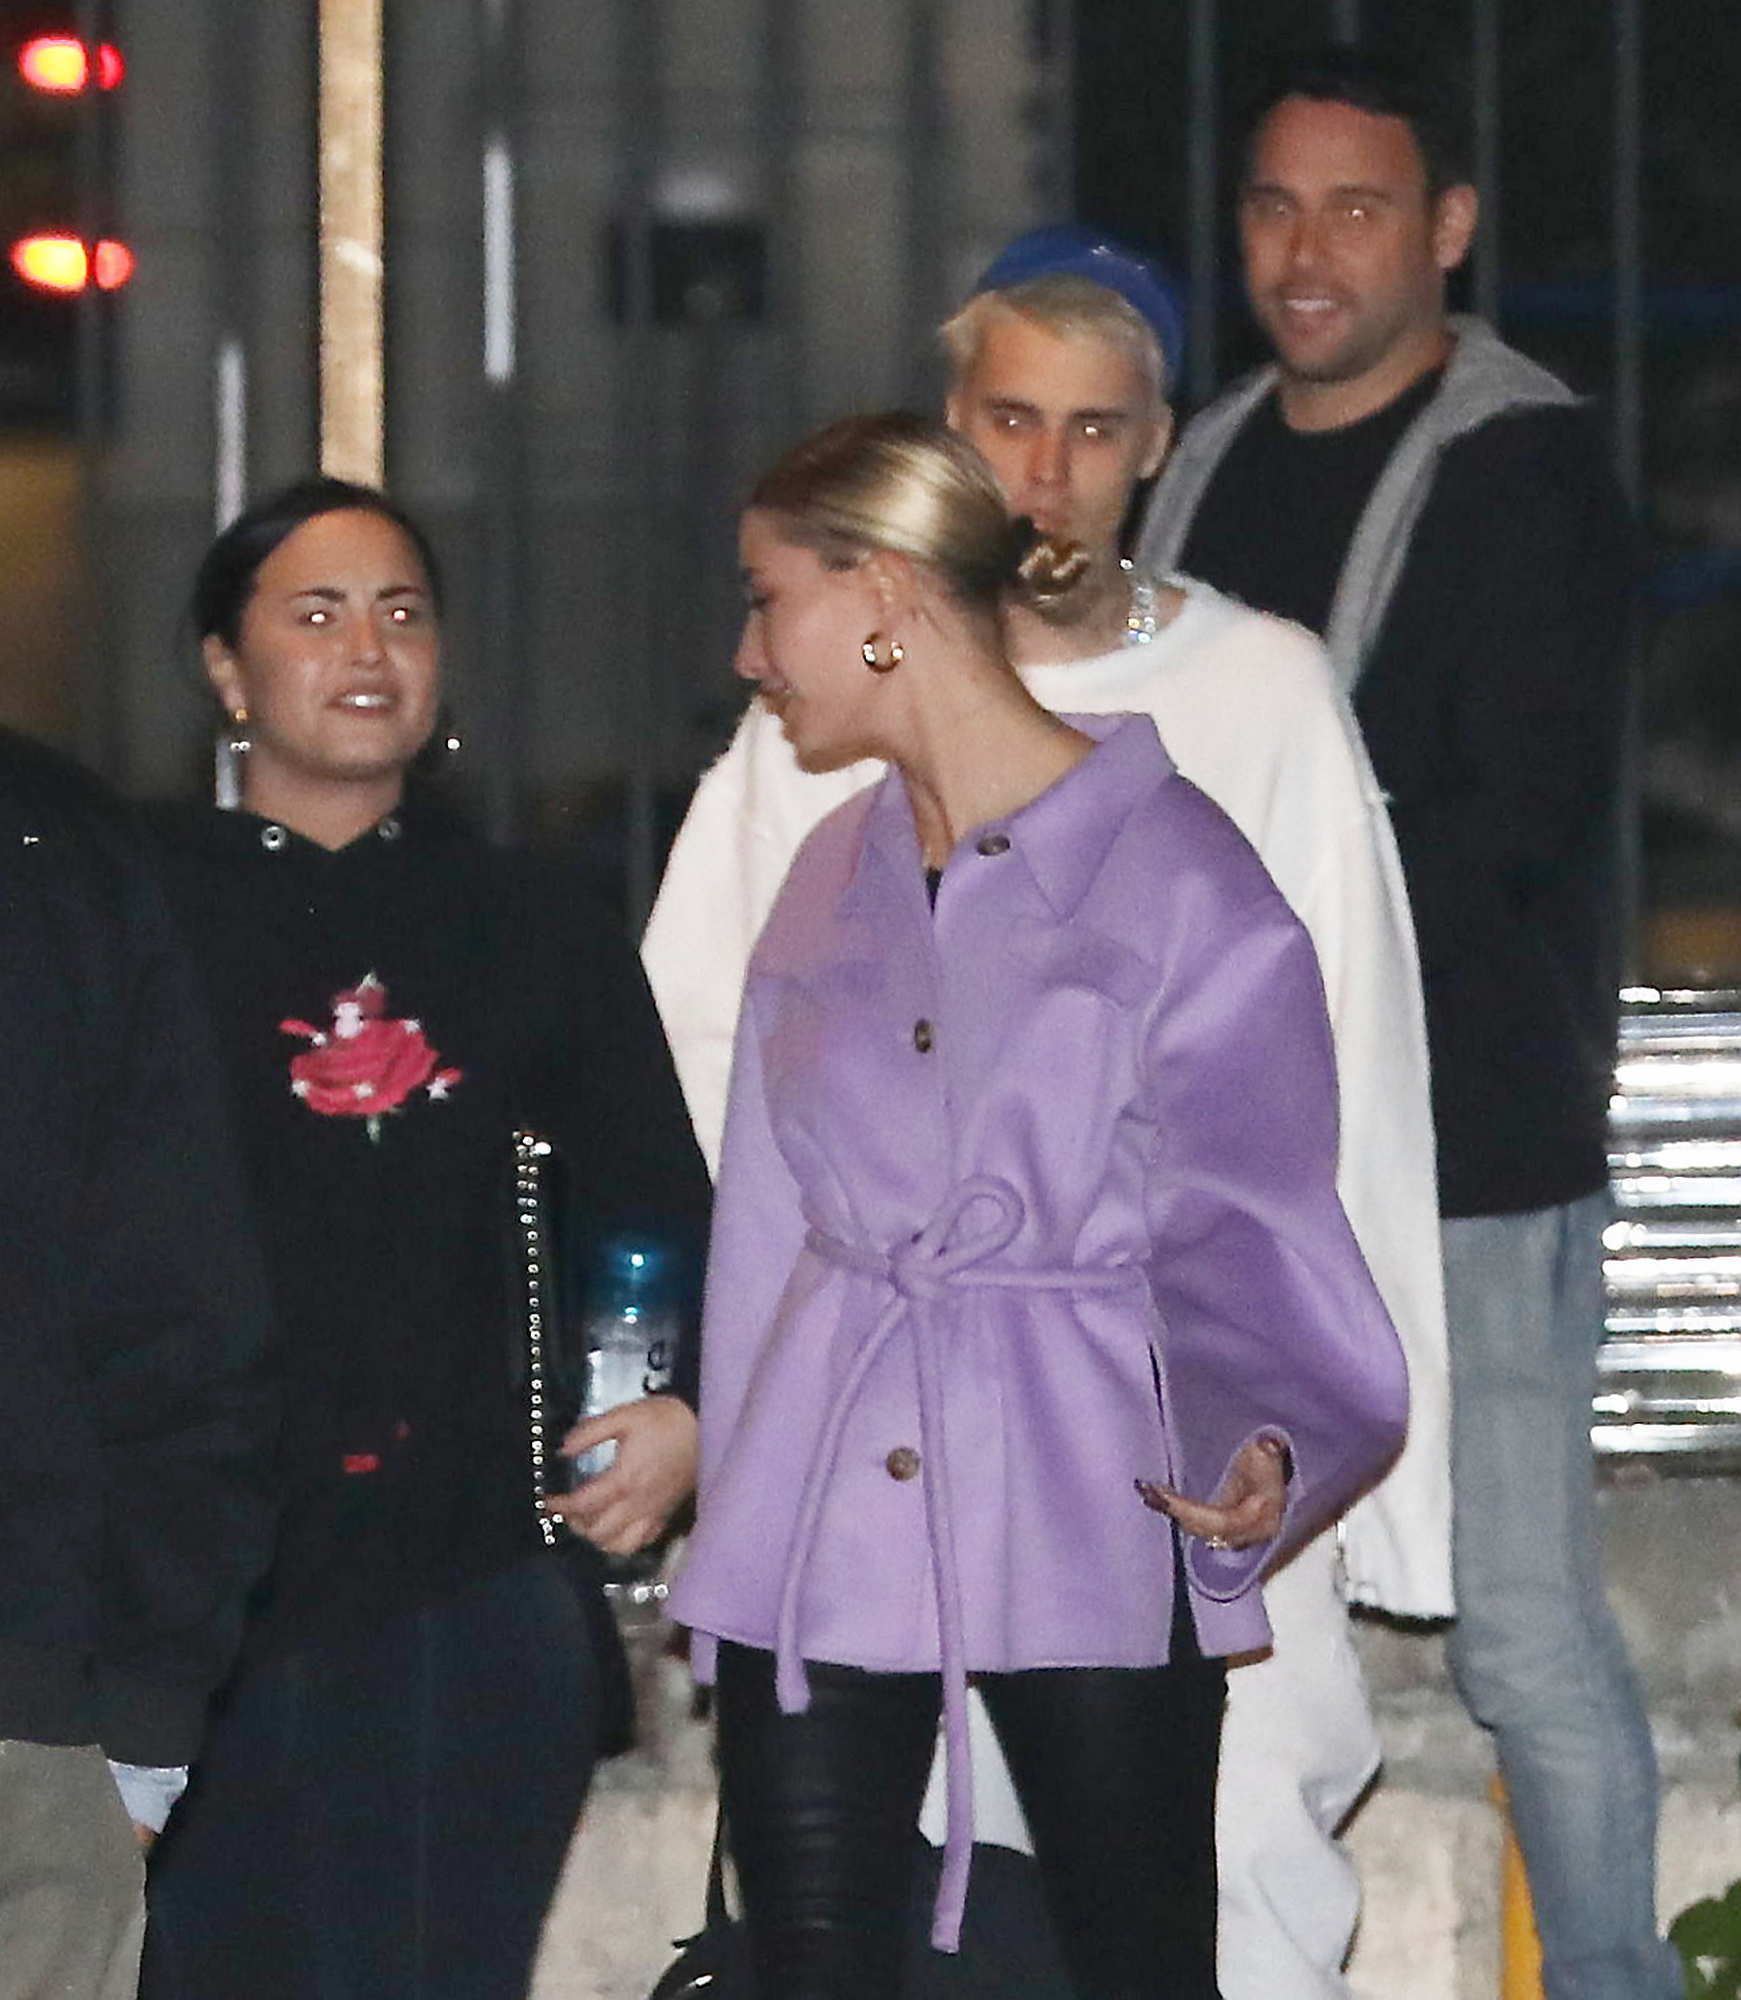 With_Justin_and_Hailey_going_to_a_night_church_service_together_in_Los_Angeles2C_CA_-_December_188.jpg